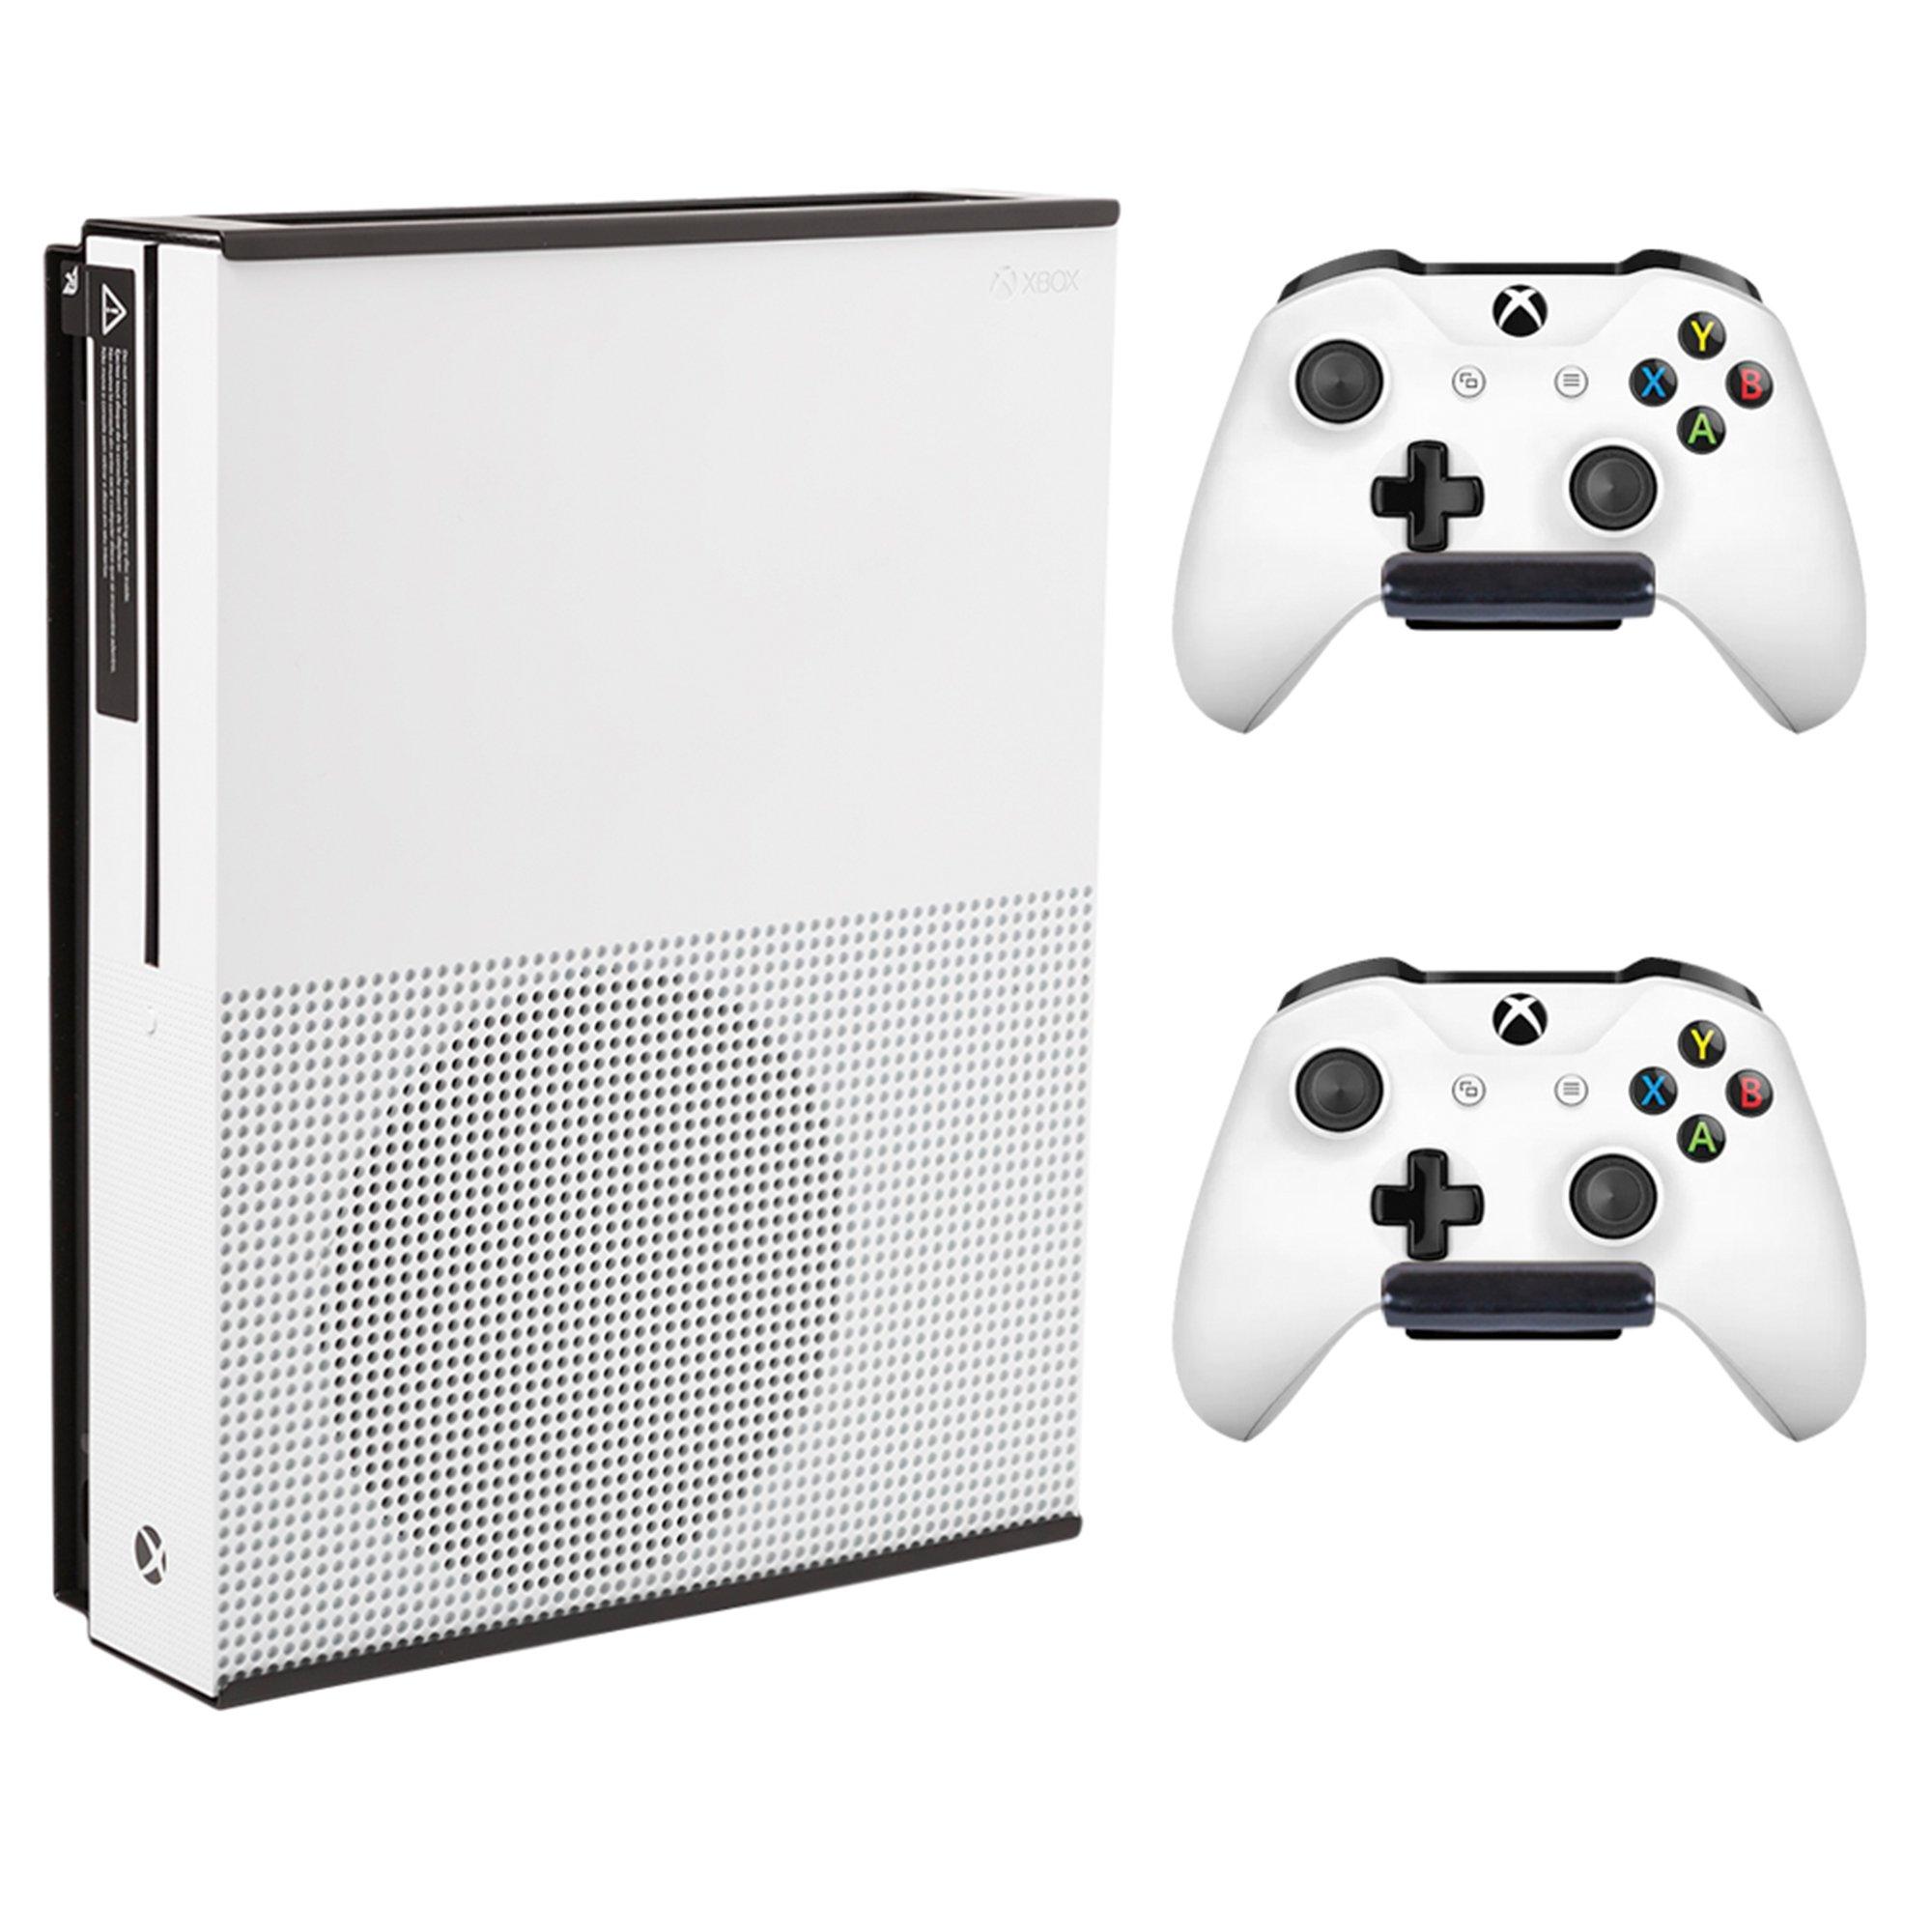 xbox one s at gamestop